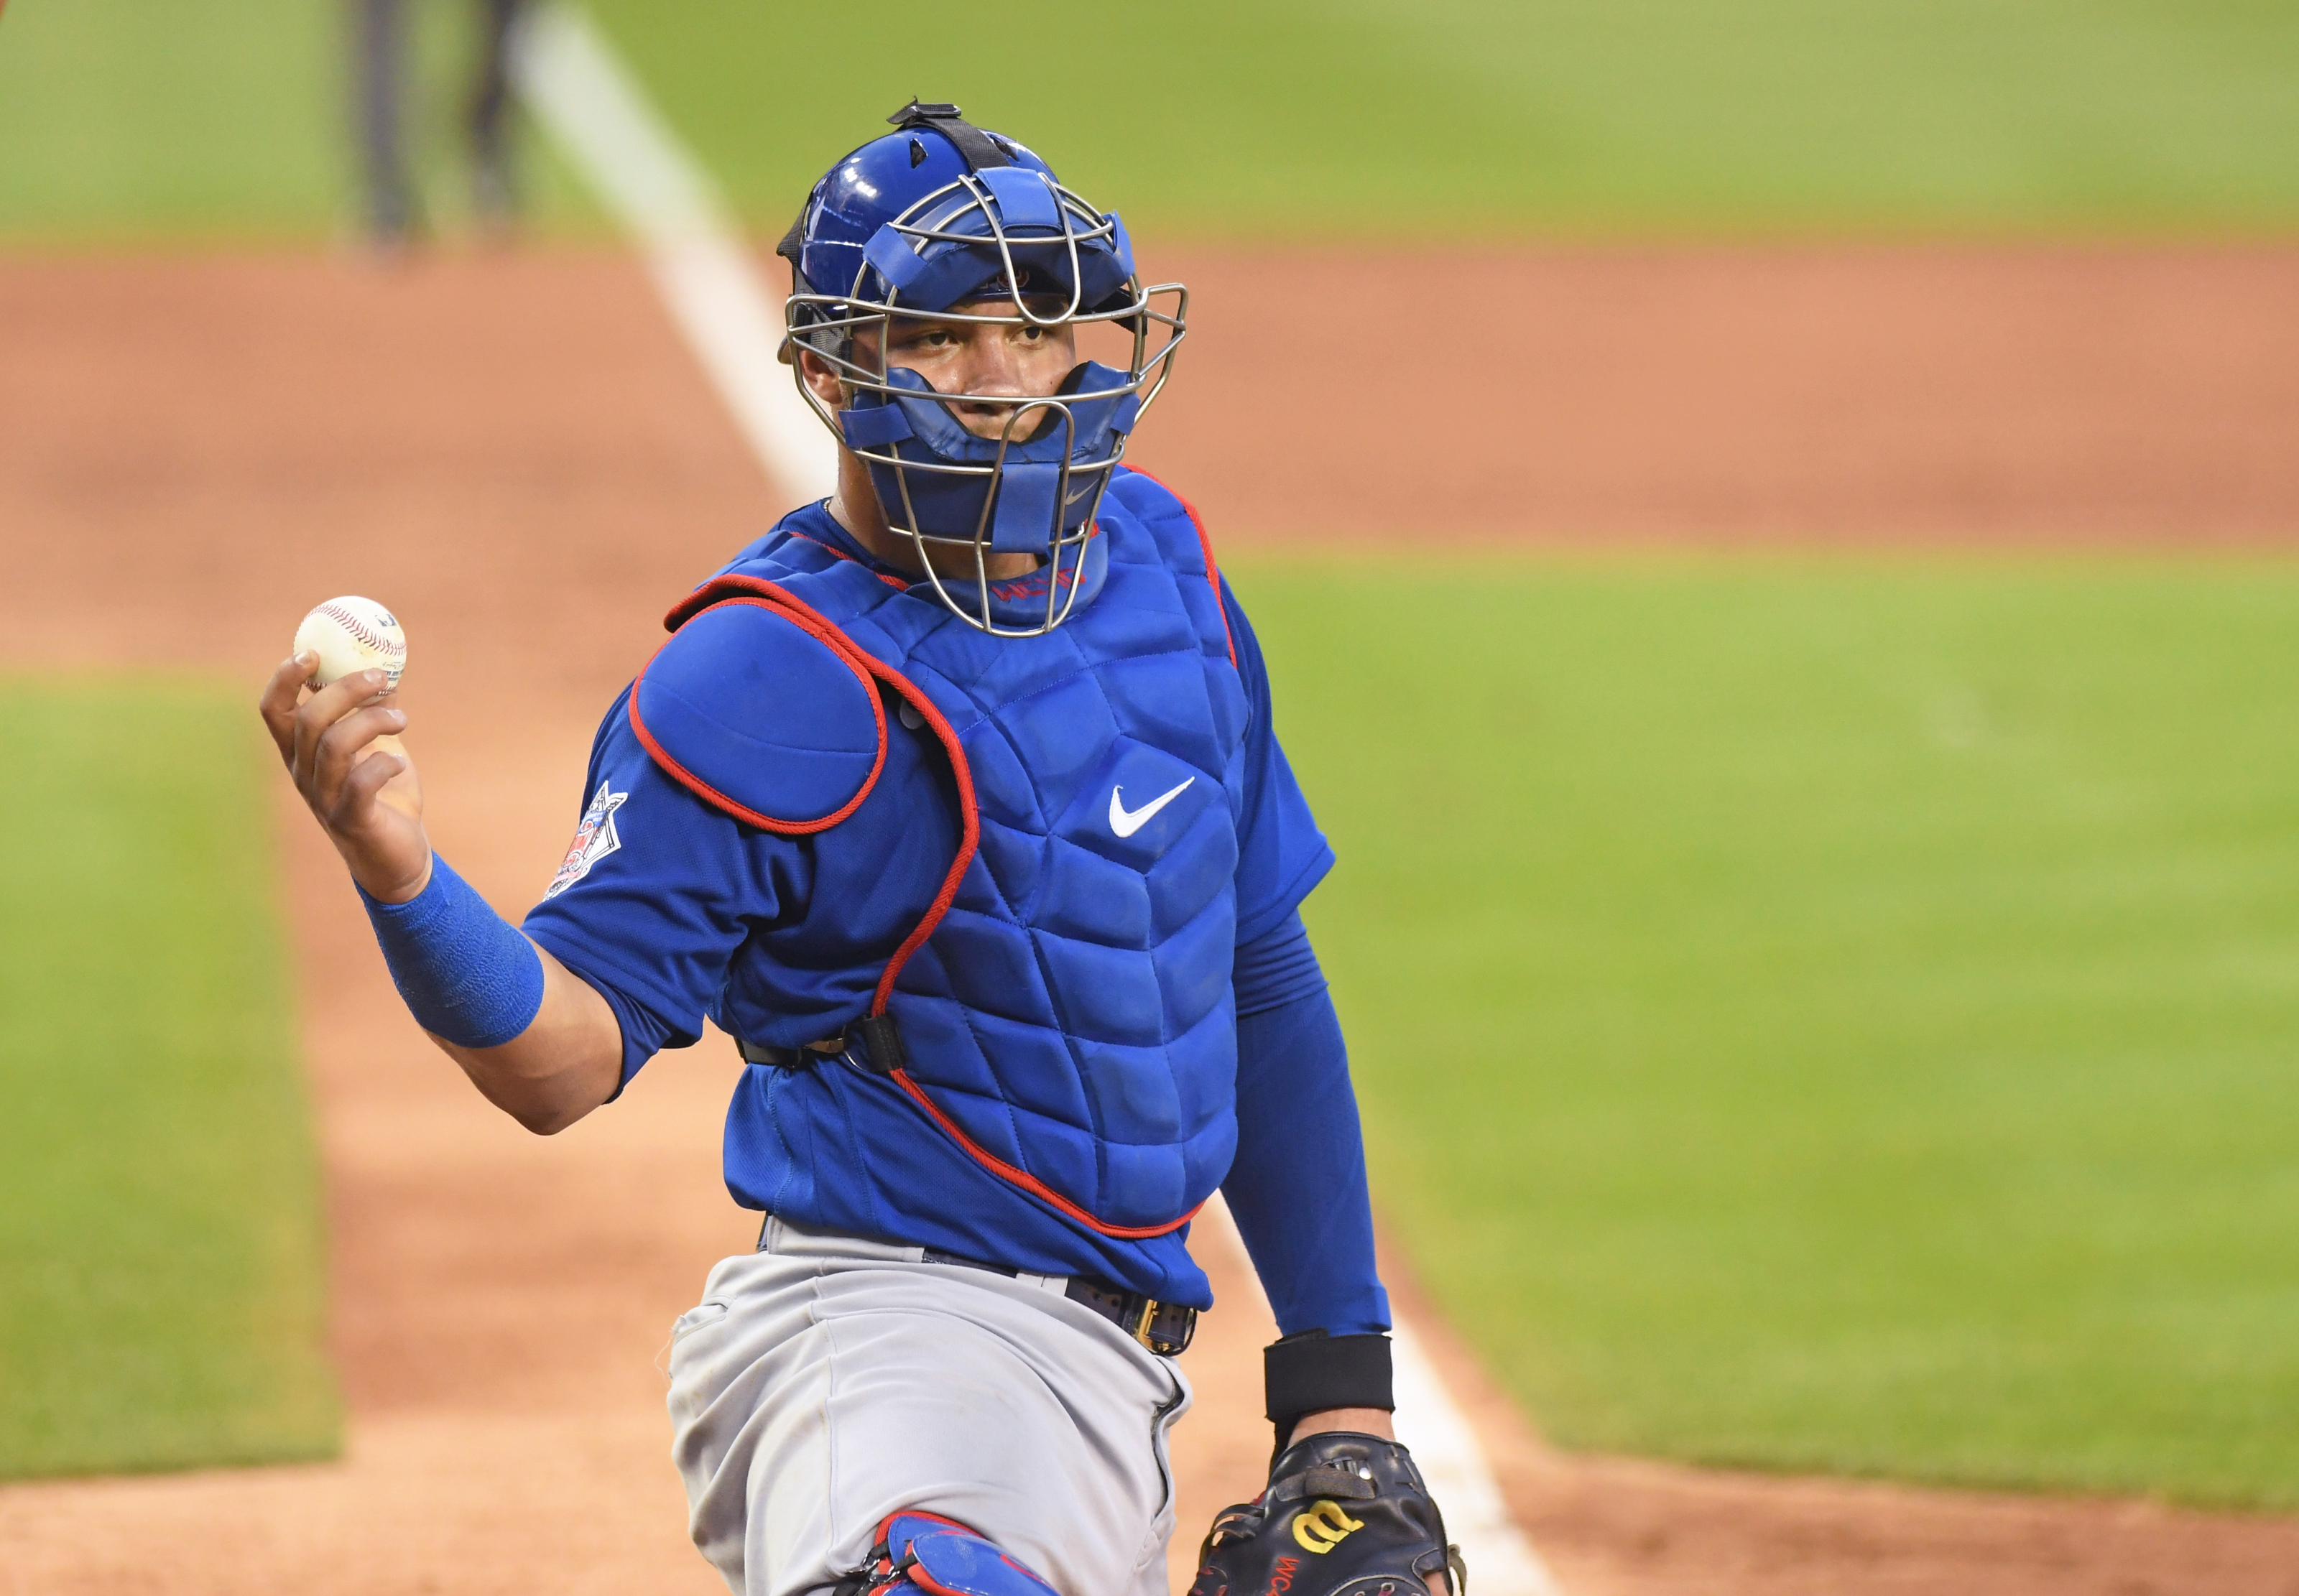 Cubs' Willson Contreras open to extension talks, bracing for trade